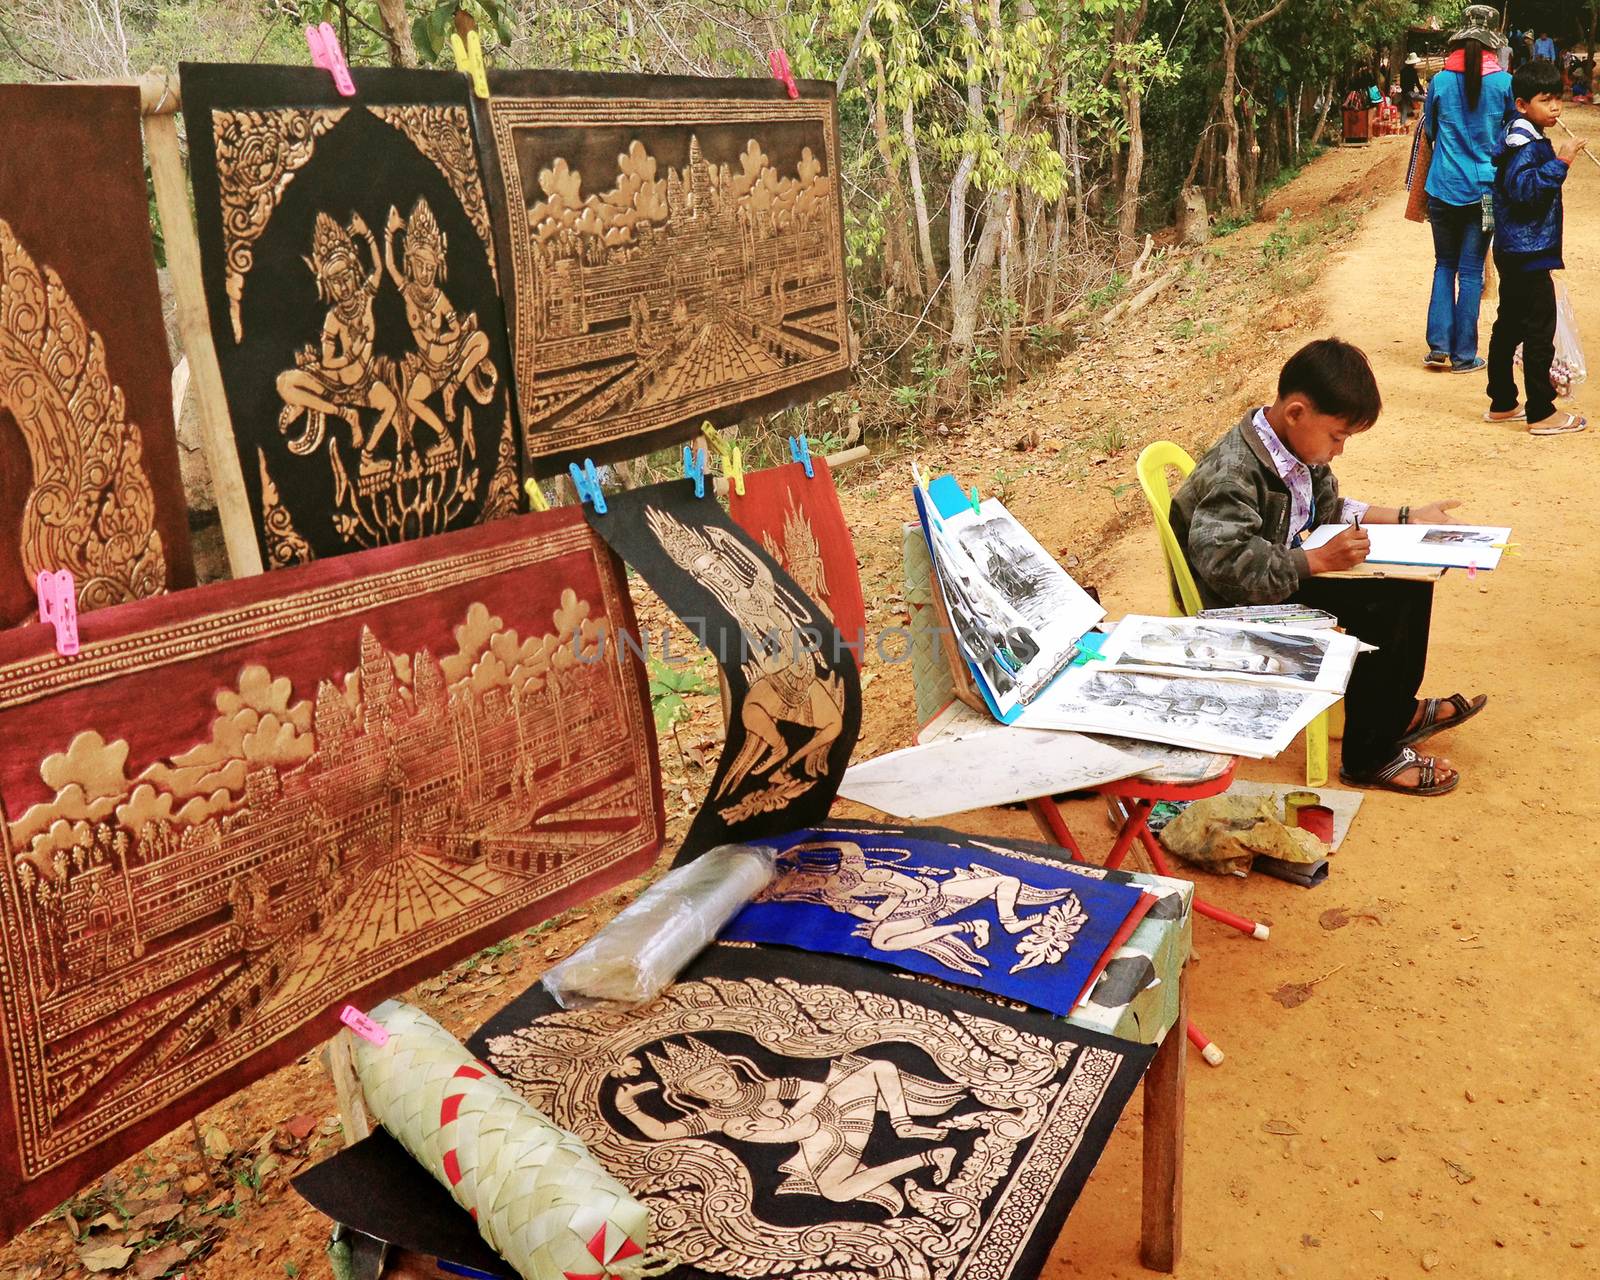 SIEM REAP, CAMBODIA - December 22, 2013 : Young artist at work painting at Neak Pean Temple area in Siem Reap. Cambodia.